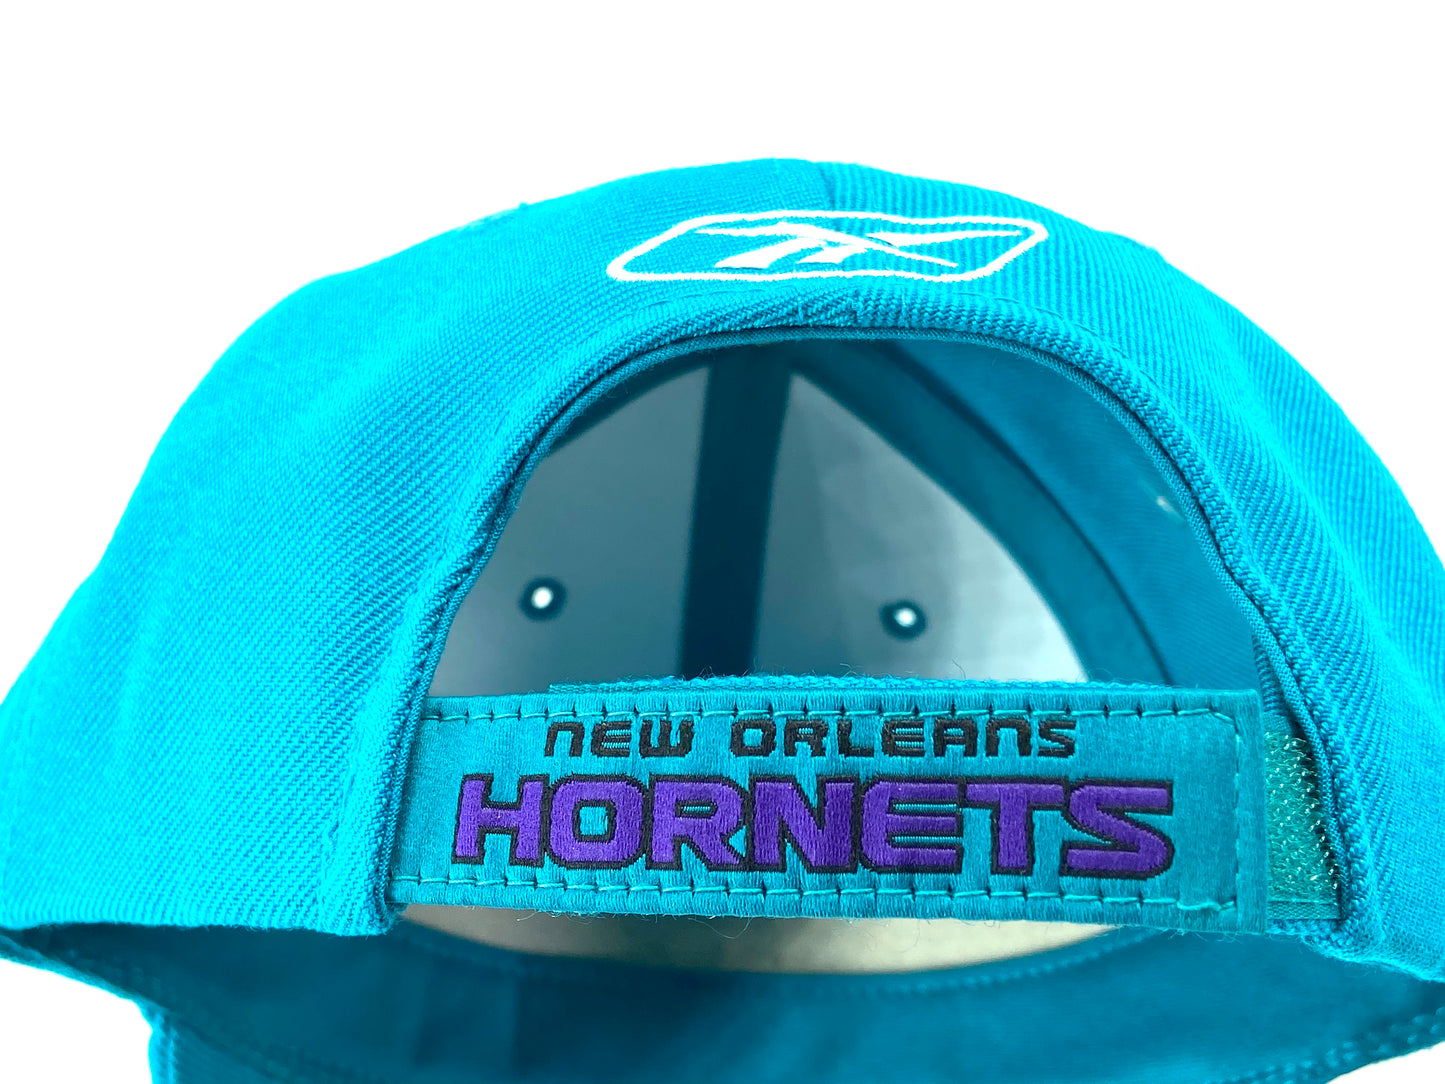 New Orleans Hornets 2007 NBA 20% Wool Turquoise Adjustable Cap